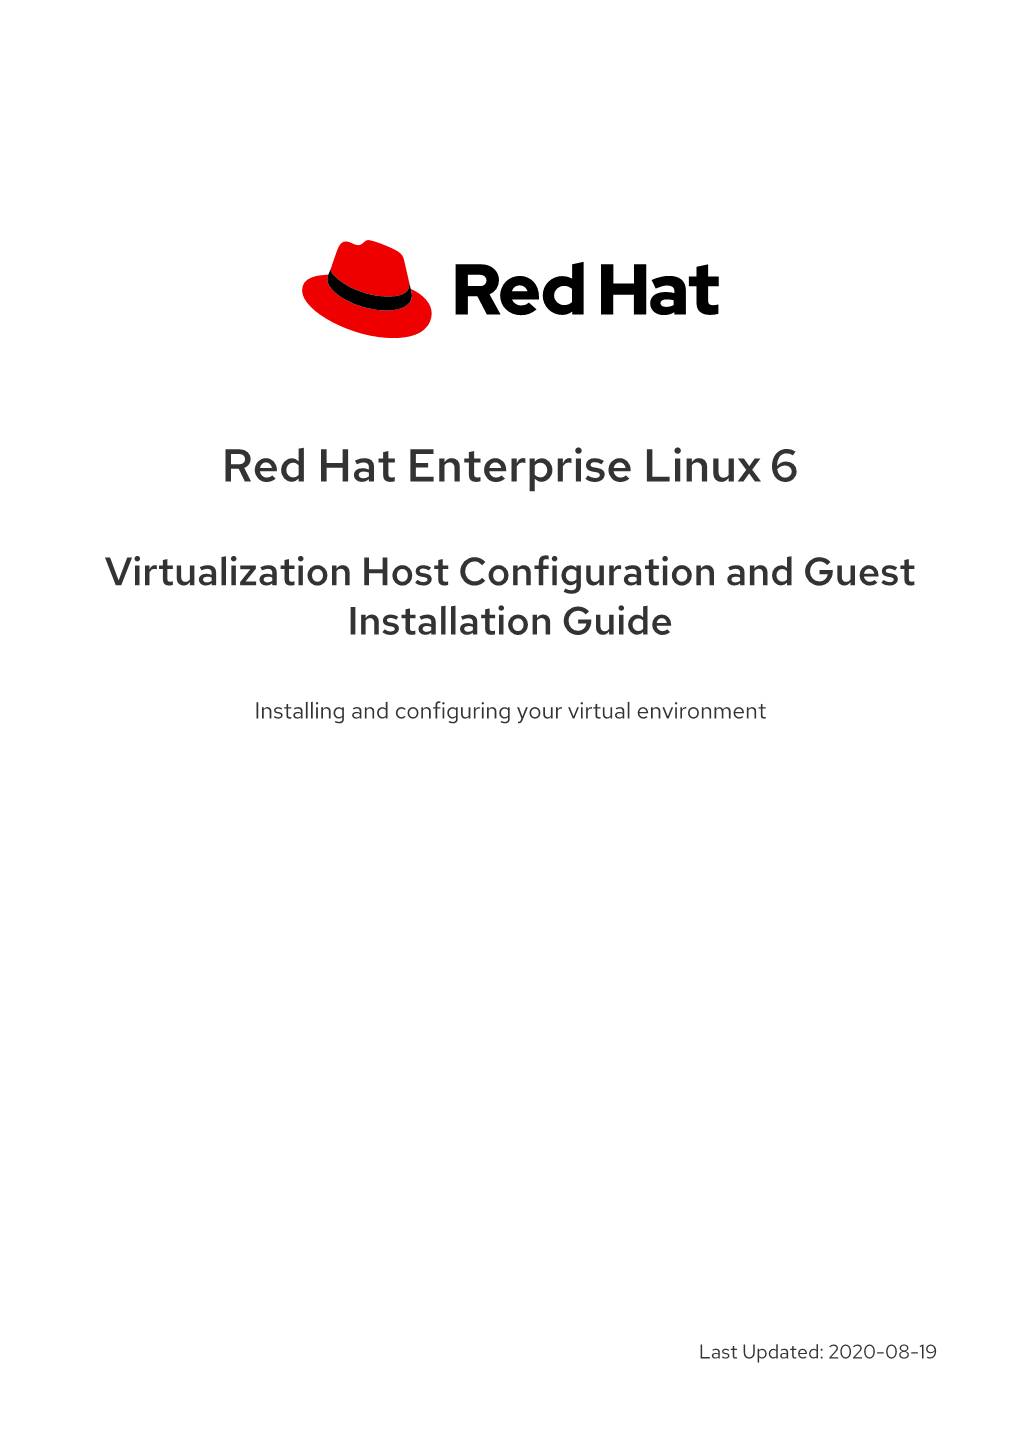 Virtualization Host Configuration and Guest Installation Guide